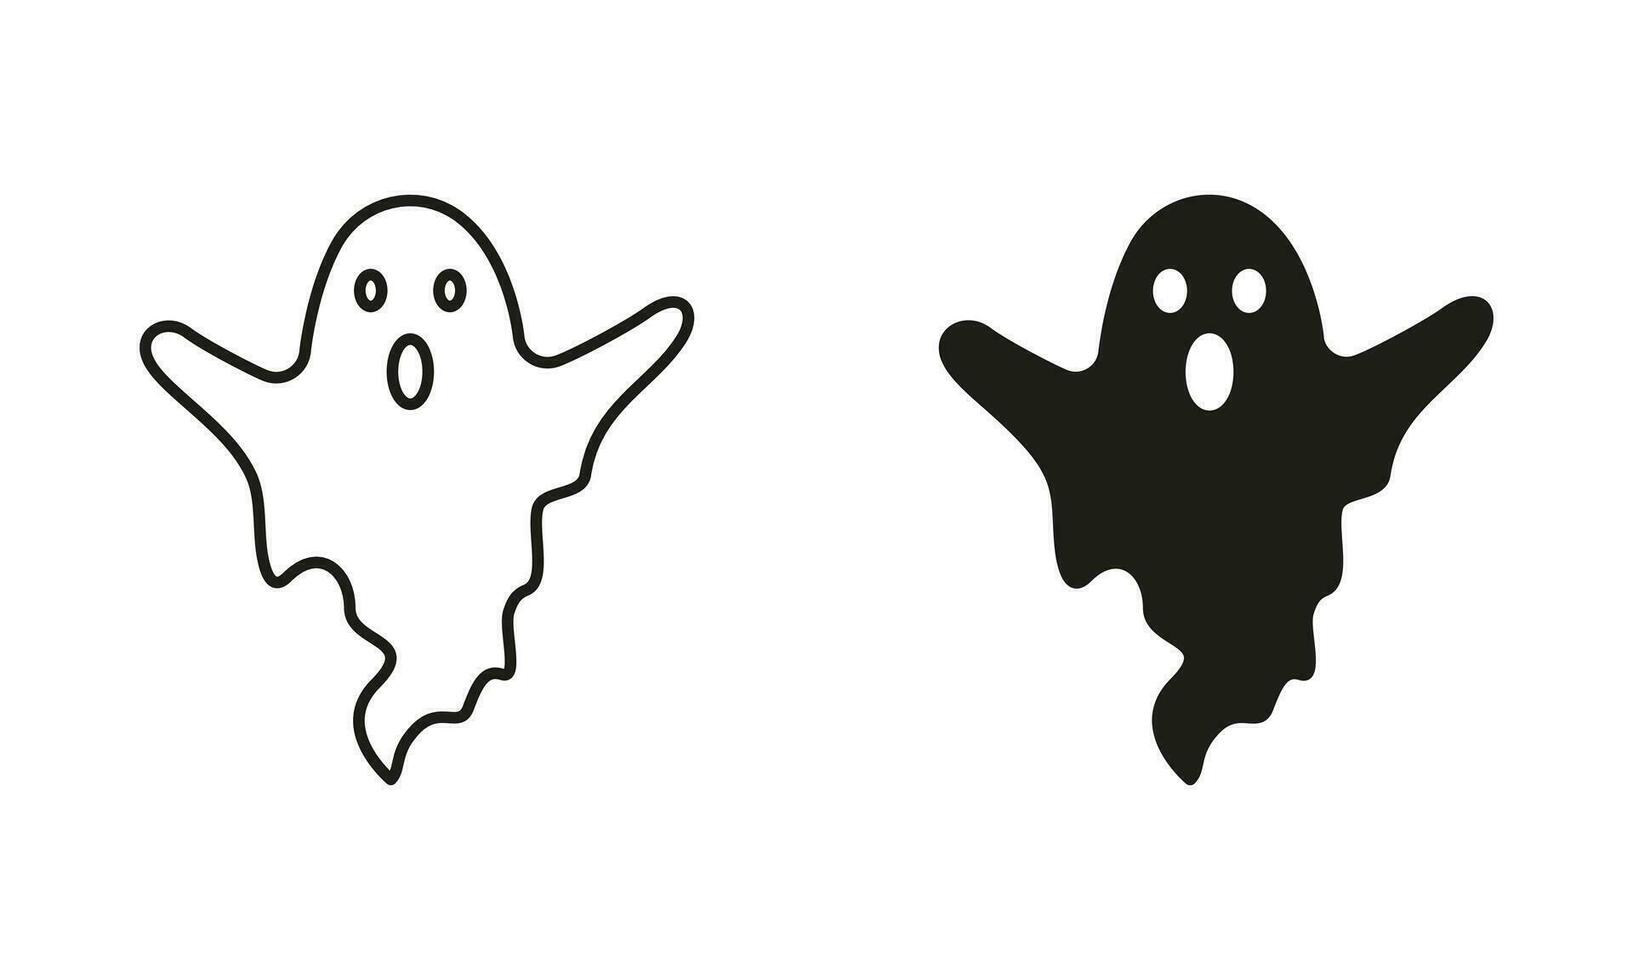 Halloween Ghost Line and Silhouette Black Icon Set. Spooky and Scary Monster for Halloween Pictogram. Cute Funny Dark Ghost Under Sheet for Halloween Symbol Collection. Isolated Vector Illustration.